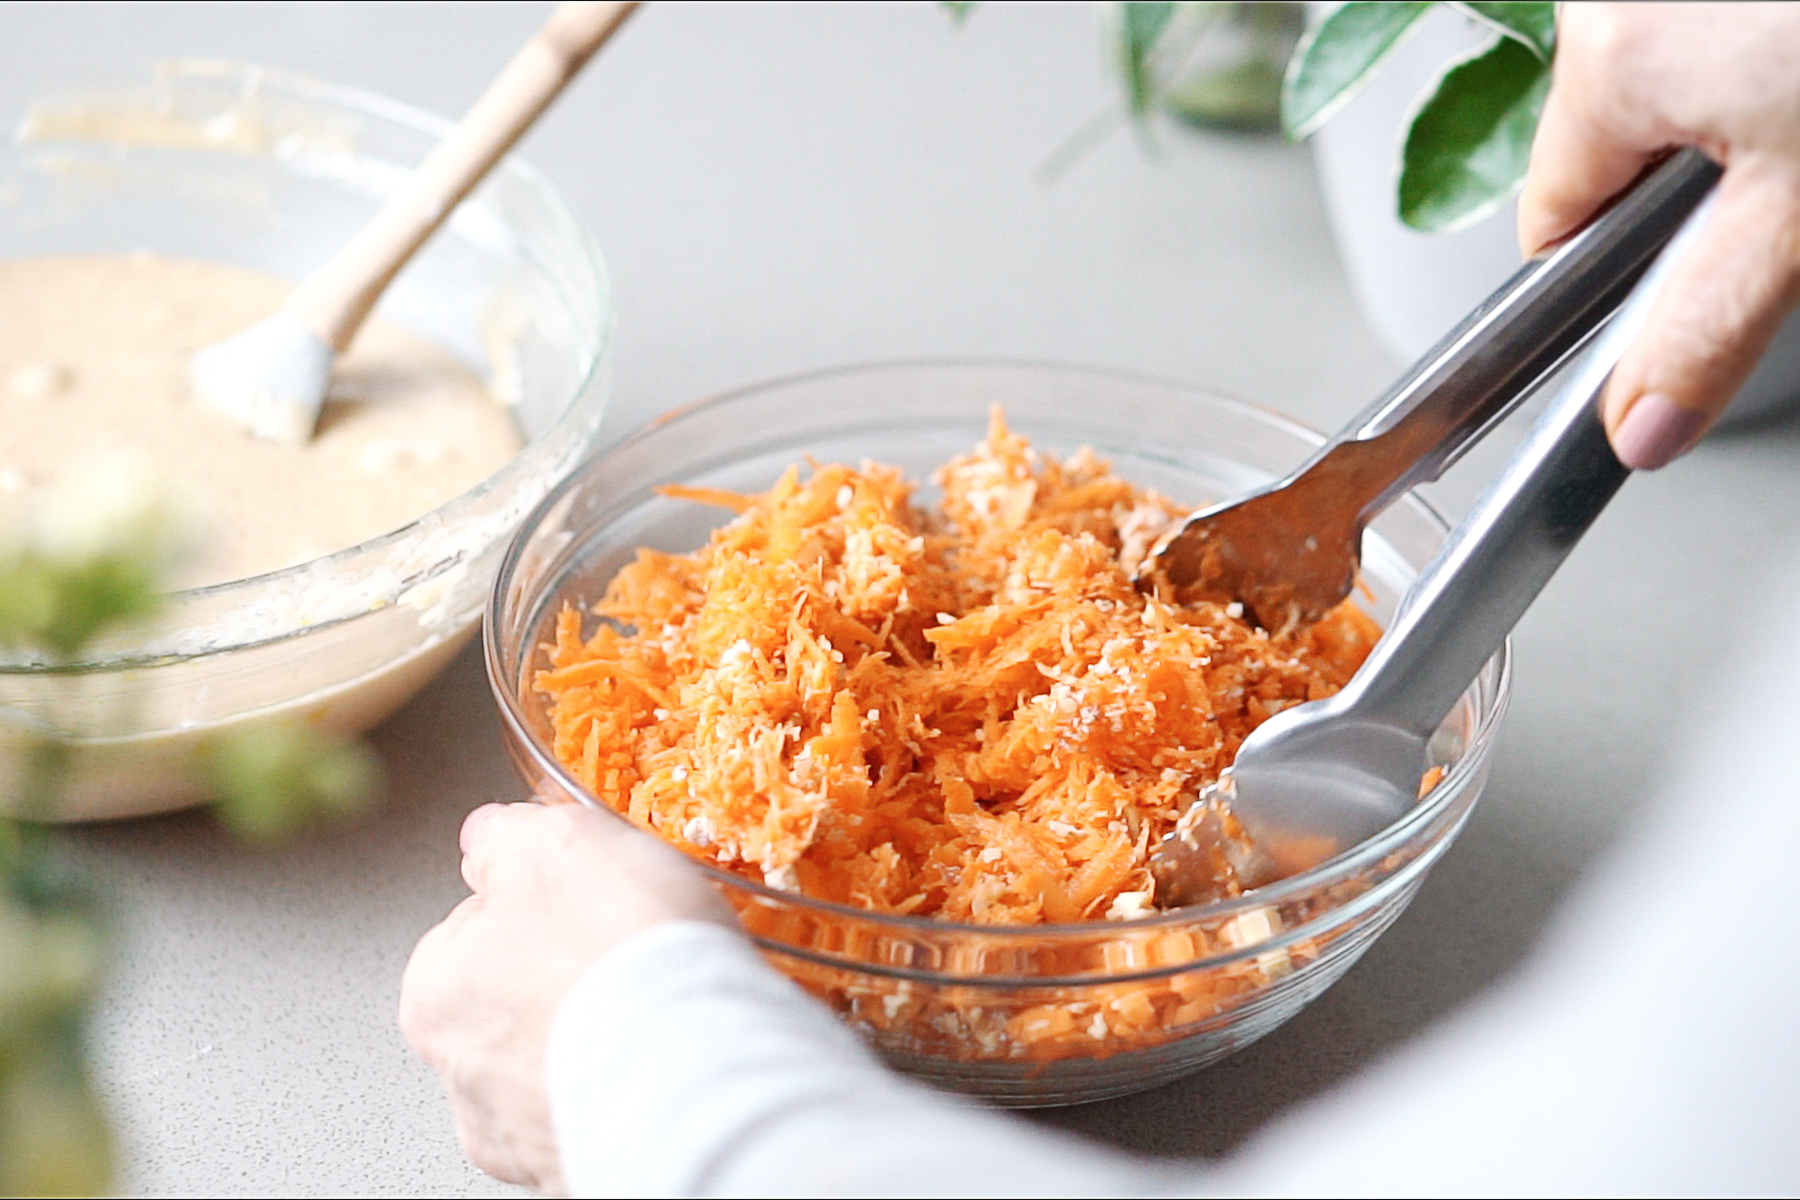 Mixing shredded carrots with pecans, and 1 tablespoon of flour